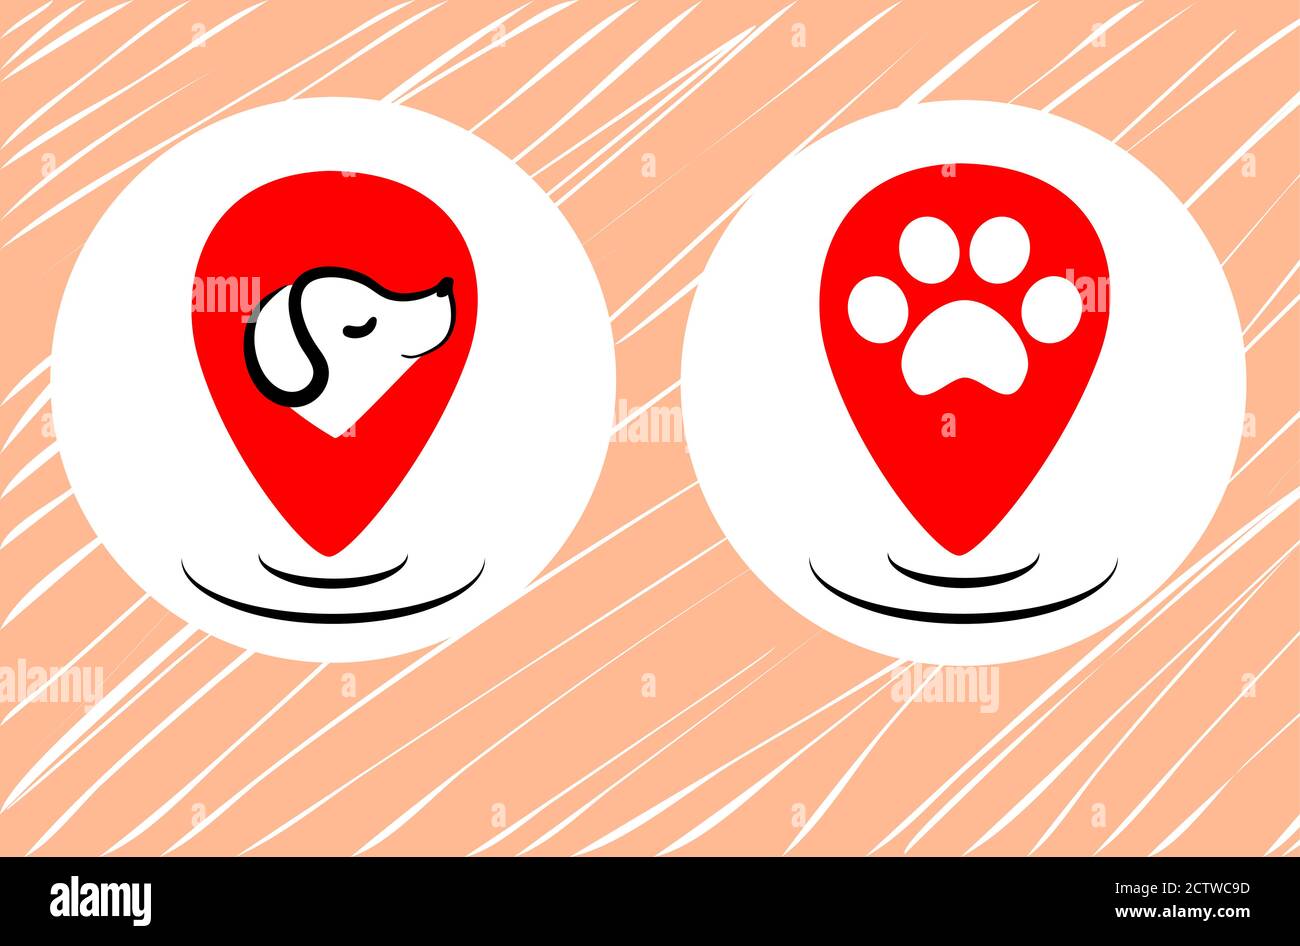 Flat pets gps logo design. Dog map marker vector. Animal walking takes care with location position. Navigation sign for pet web app. Cute happy puppy. Stock Vector